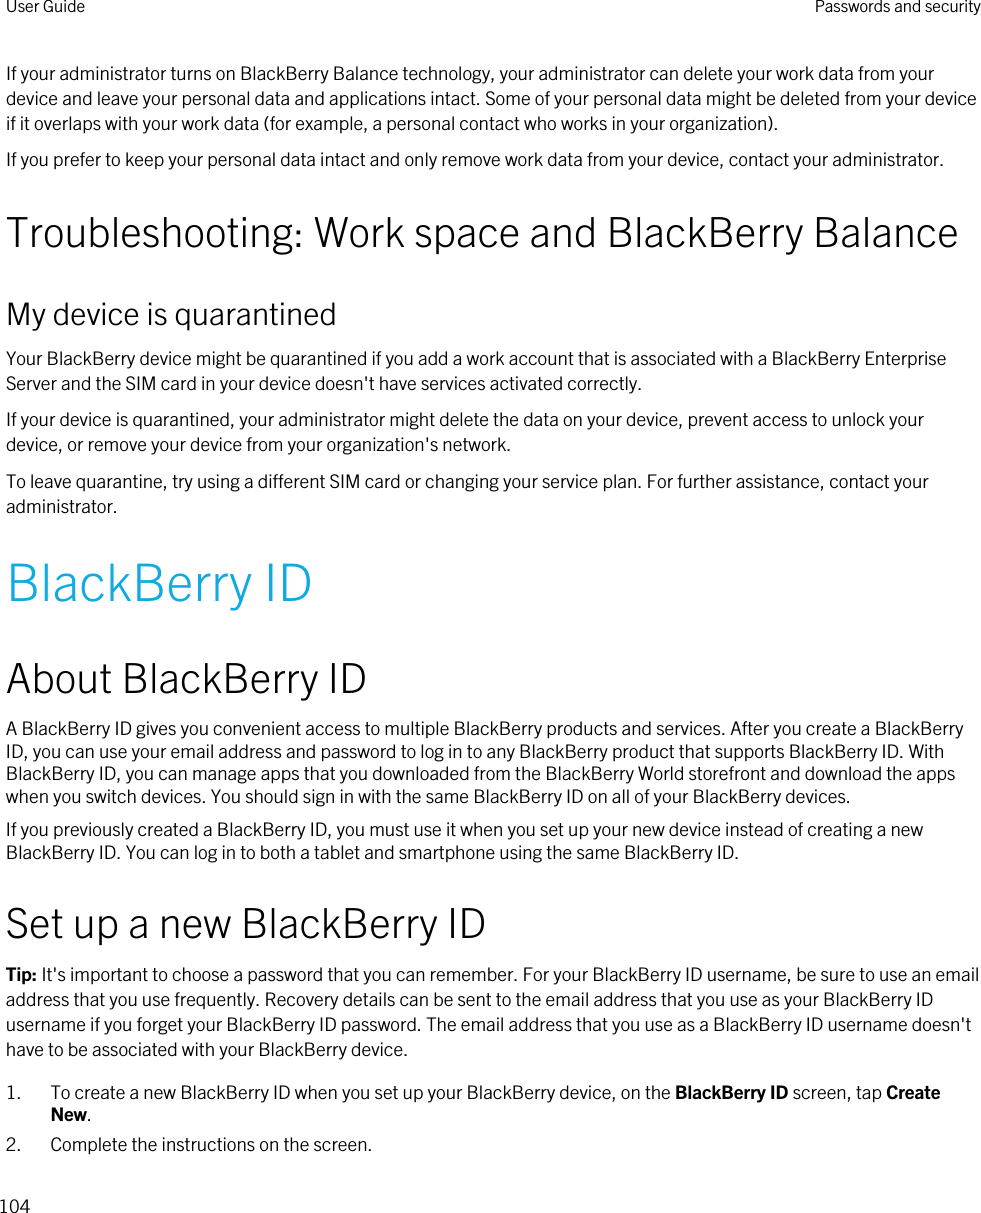 If your administrator turns on BlackBerry Balance technology, your administrator can delete your work data from your device and leave your personal data and applications intact. Some of your personal data might be deleted from your device if it overlaps with your work data (for example, a personal contact who works in your organization).If you prefer to keep your personal data intact and only remove work data from your device, contact your administrator.Troubleshooting: Work space and BlackBerry BalanceMy device is quarantinedYour BlackBerry device might be quarantined if you add a work account that is associated with a BlackBerry Enterprise Server and the SIM card in your device doesn&apos;t have services activated correctly.If your device is quarantined, your administrator might delete the data on your device, prevent access to unlock your device, or remove your device from your organization&apos;s network.To leave quarantine, try using a different SIM card or changing your service plan. For further assistance, contact your administrator.BlackBerry IDAbout BlackBerry IDA BlackBerry ID gives you convenient access to multiple BlackBerry products and services. After you create a BlackBerry ID, you can use your email address and password to log in to any BlackBerry product that supports BlackBerry ID. With BlackBerry ID, you can manage apps that you downloaded from the BlackBerry World storefront and download the apps when you switch devices. You should sign in with the same BlackBerry ID on all of your BlackBerry devices.If you previously created a BlackBerry ID, you must use it when you set up your new device instead of creating a new BlackBerry ID. You can log in to both a tablet and smartphone using the same BlackBerry ID.Set up a new BlackBerry IDTip: It&apos;s important to choose a password that you can remember. For your BlackBerry ID username, be sure to use an email address that you use frequently. Recovery details can be sent to the email address that you use as your BlackBerry ID username if you forget your BlackBerry ID password. The email address that you use as a BlackBerry ID username doesn&apos;t have to be associated with your BlackBerry device.1. To create a new BlackBerry ID when you set up your BlackBerry device, on the BlackBerry ID screen, tap Create New.2. Complete the instructions on the screen.User Guide Passwords and security104